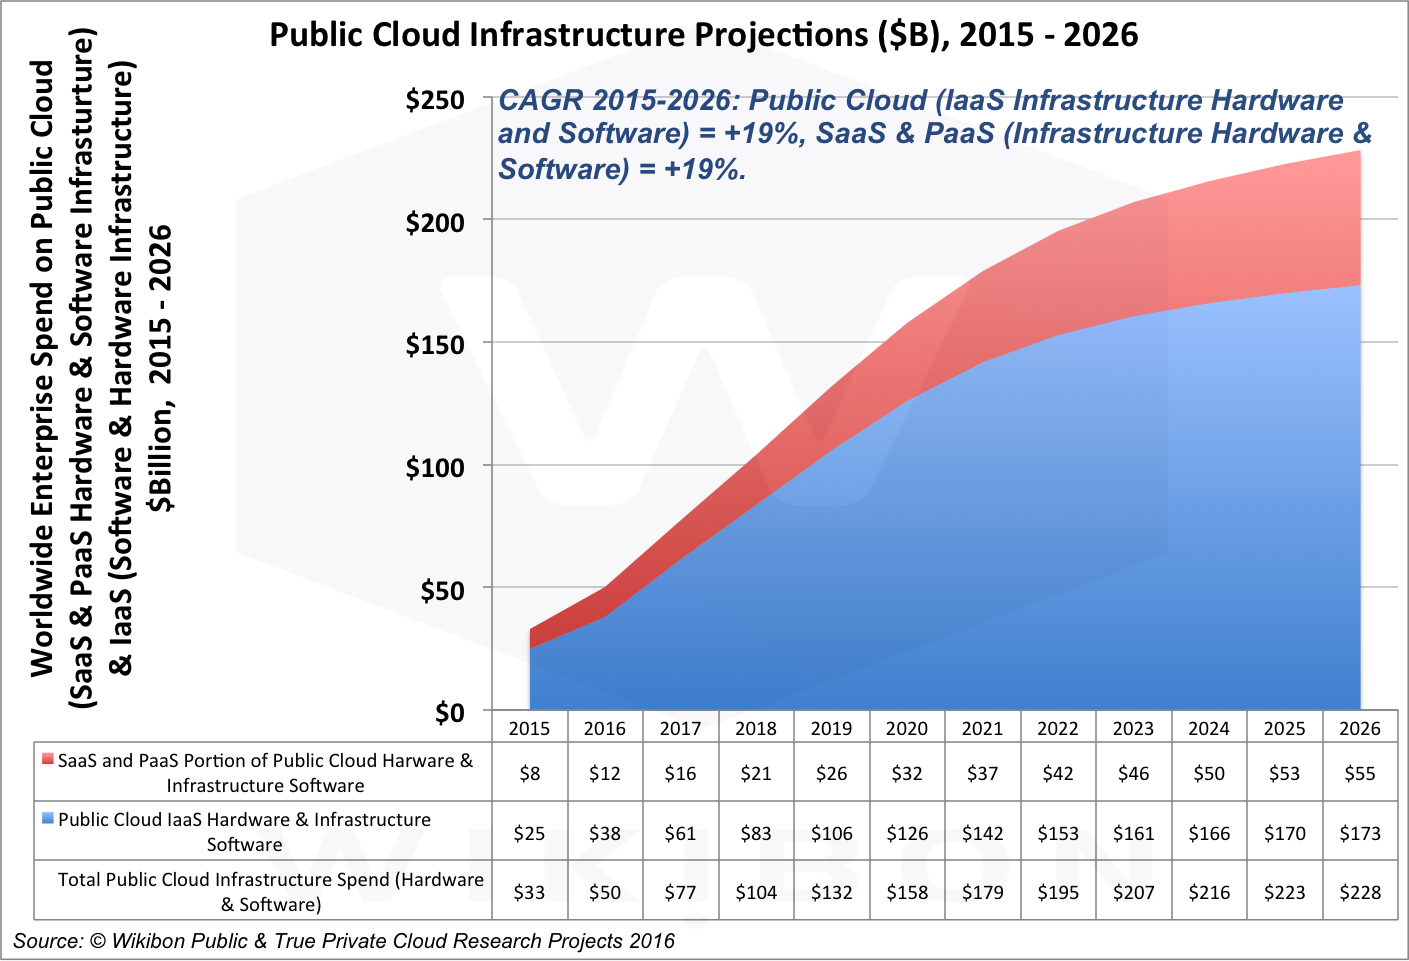 Figure 3 - Projected Breakout of True Private Cloud into True Private Cloud (Hardware & Software) and True Hosted Private Cloud from 2015 to 2026, $Billions. Source: © Wikibon Public & True Private Cloud Research, 2016.